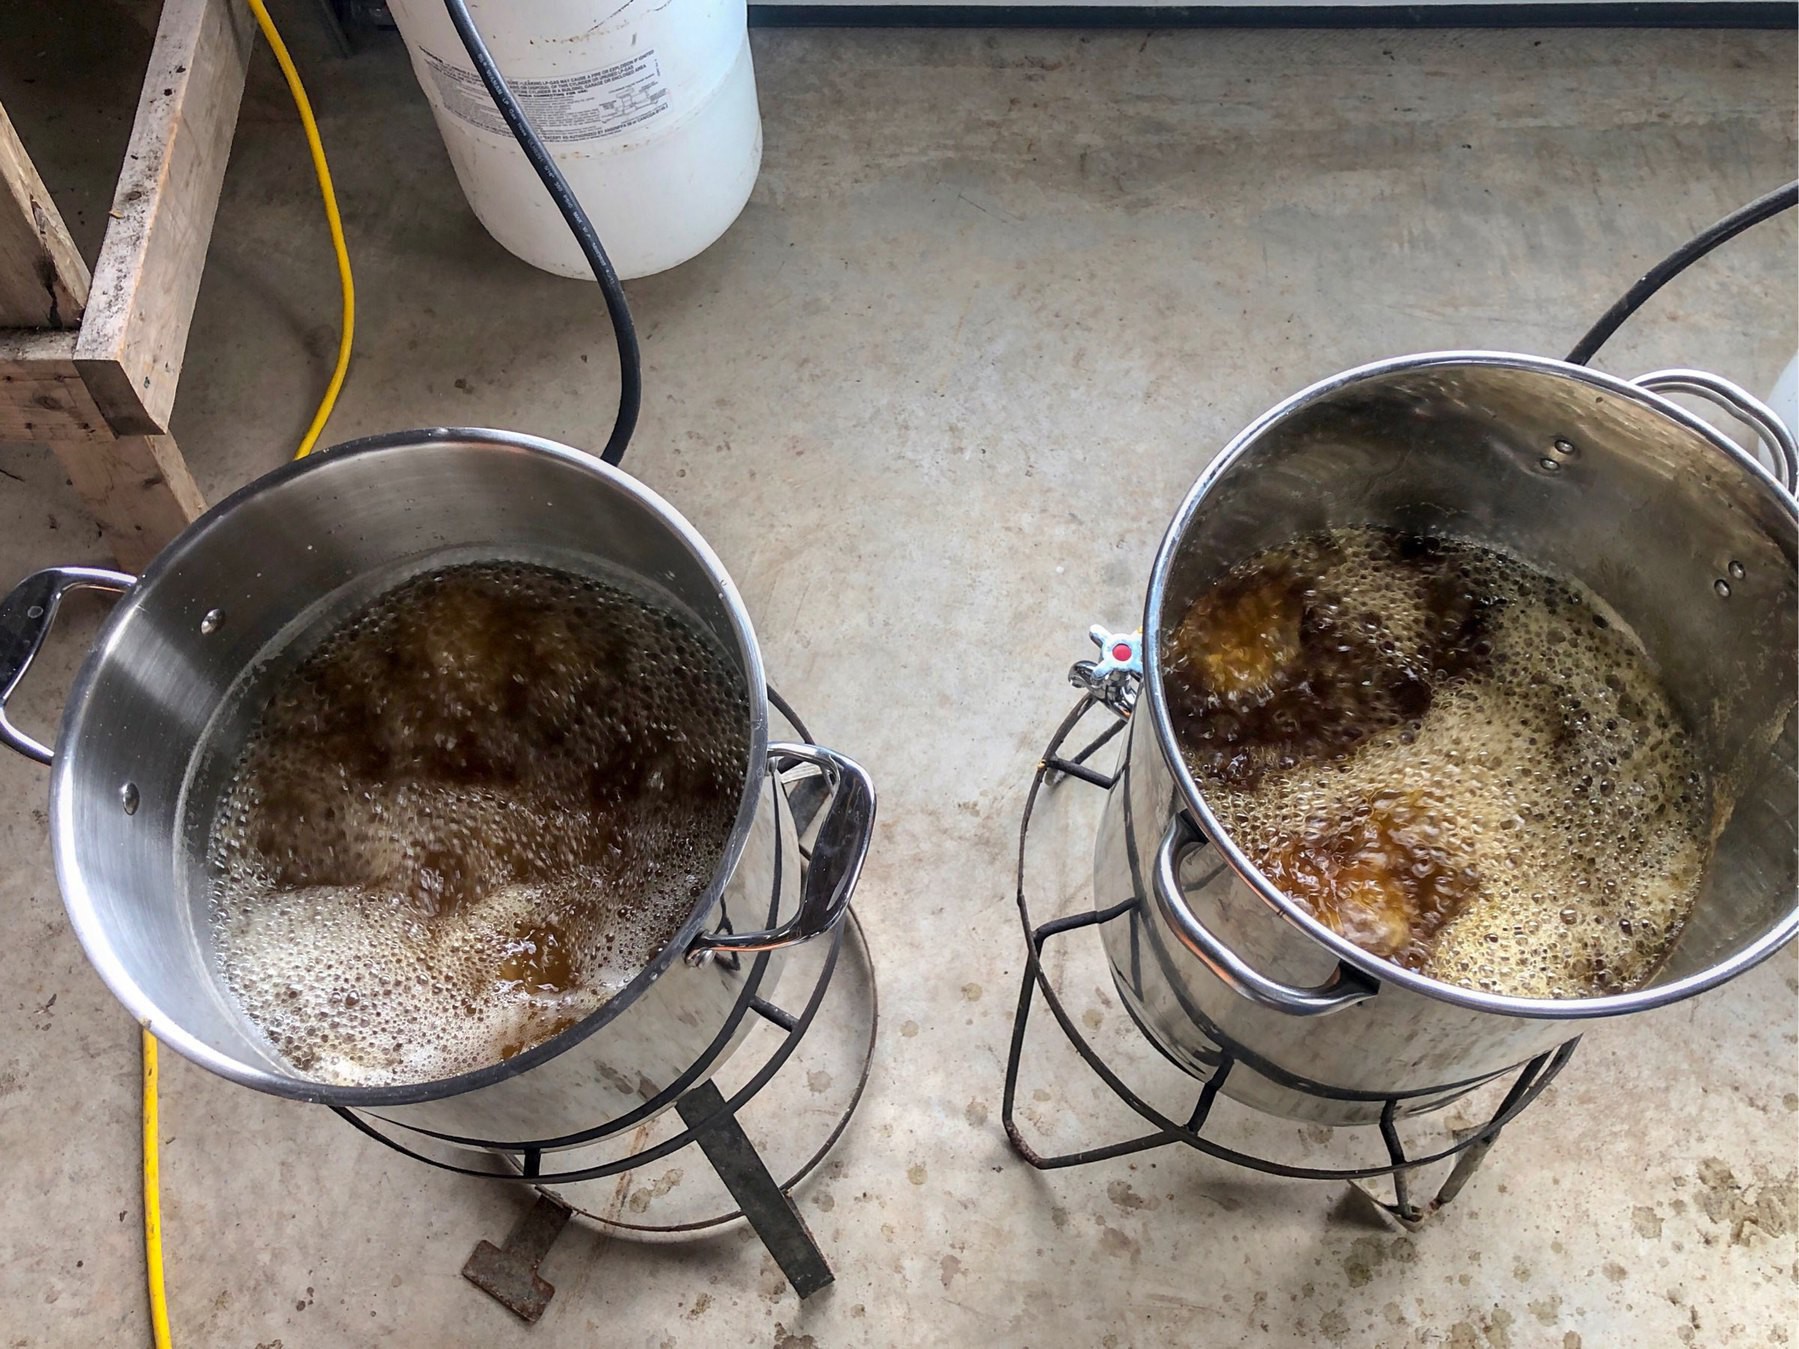 two pots of syrup boiling on propane burners